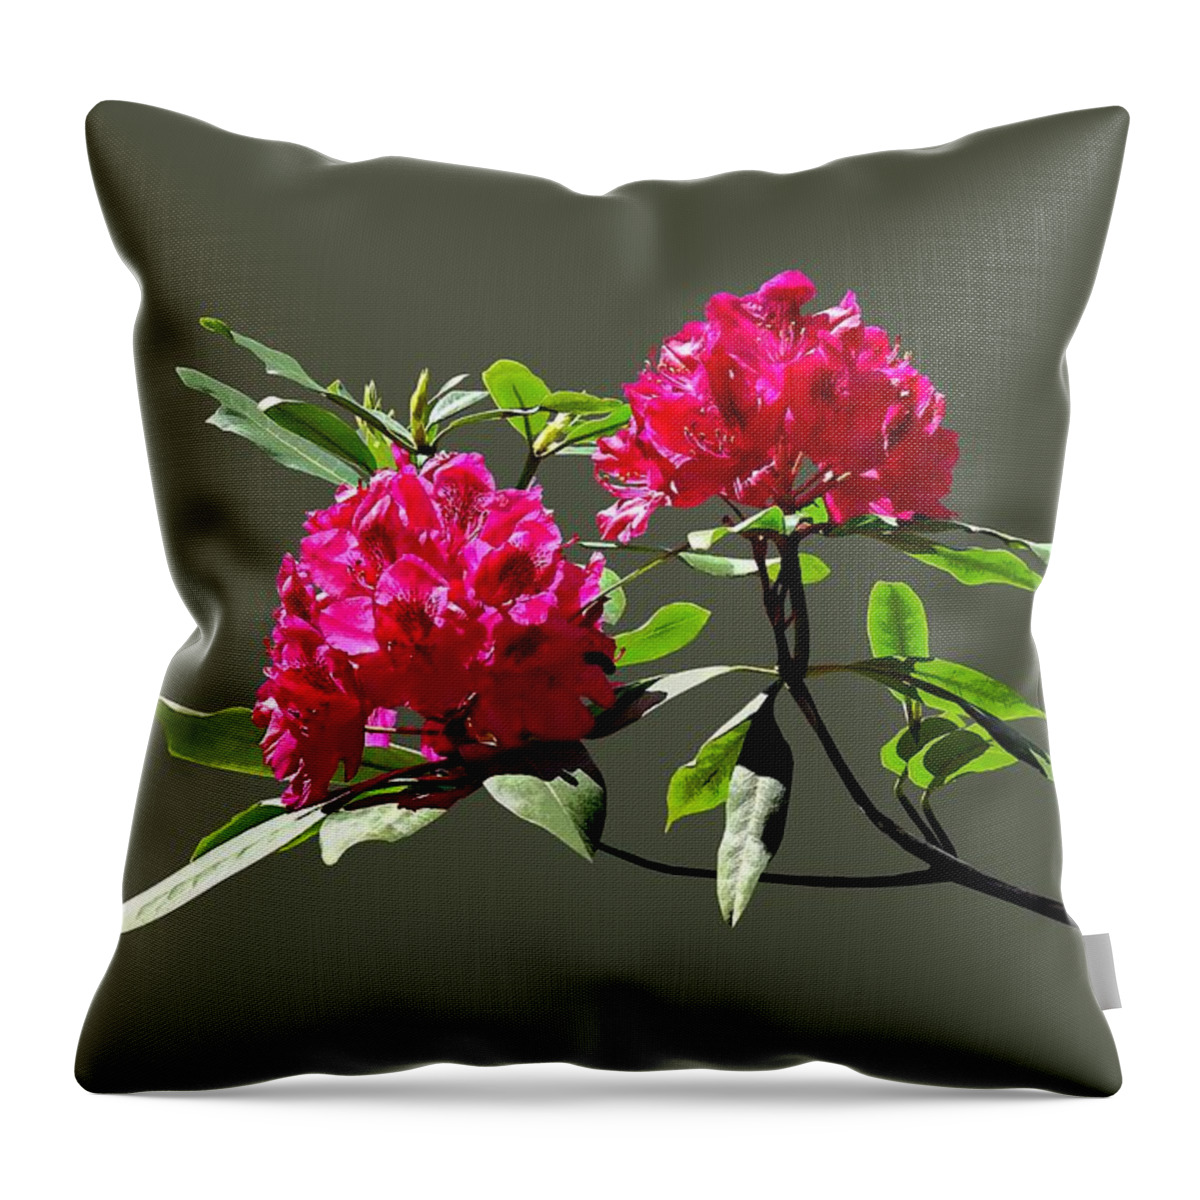 Rhododentron Throw Pillow featuring the photograph Two Dark Red Rhododendrons by Susan Savad